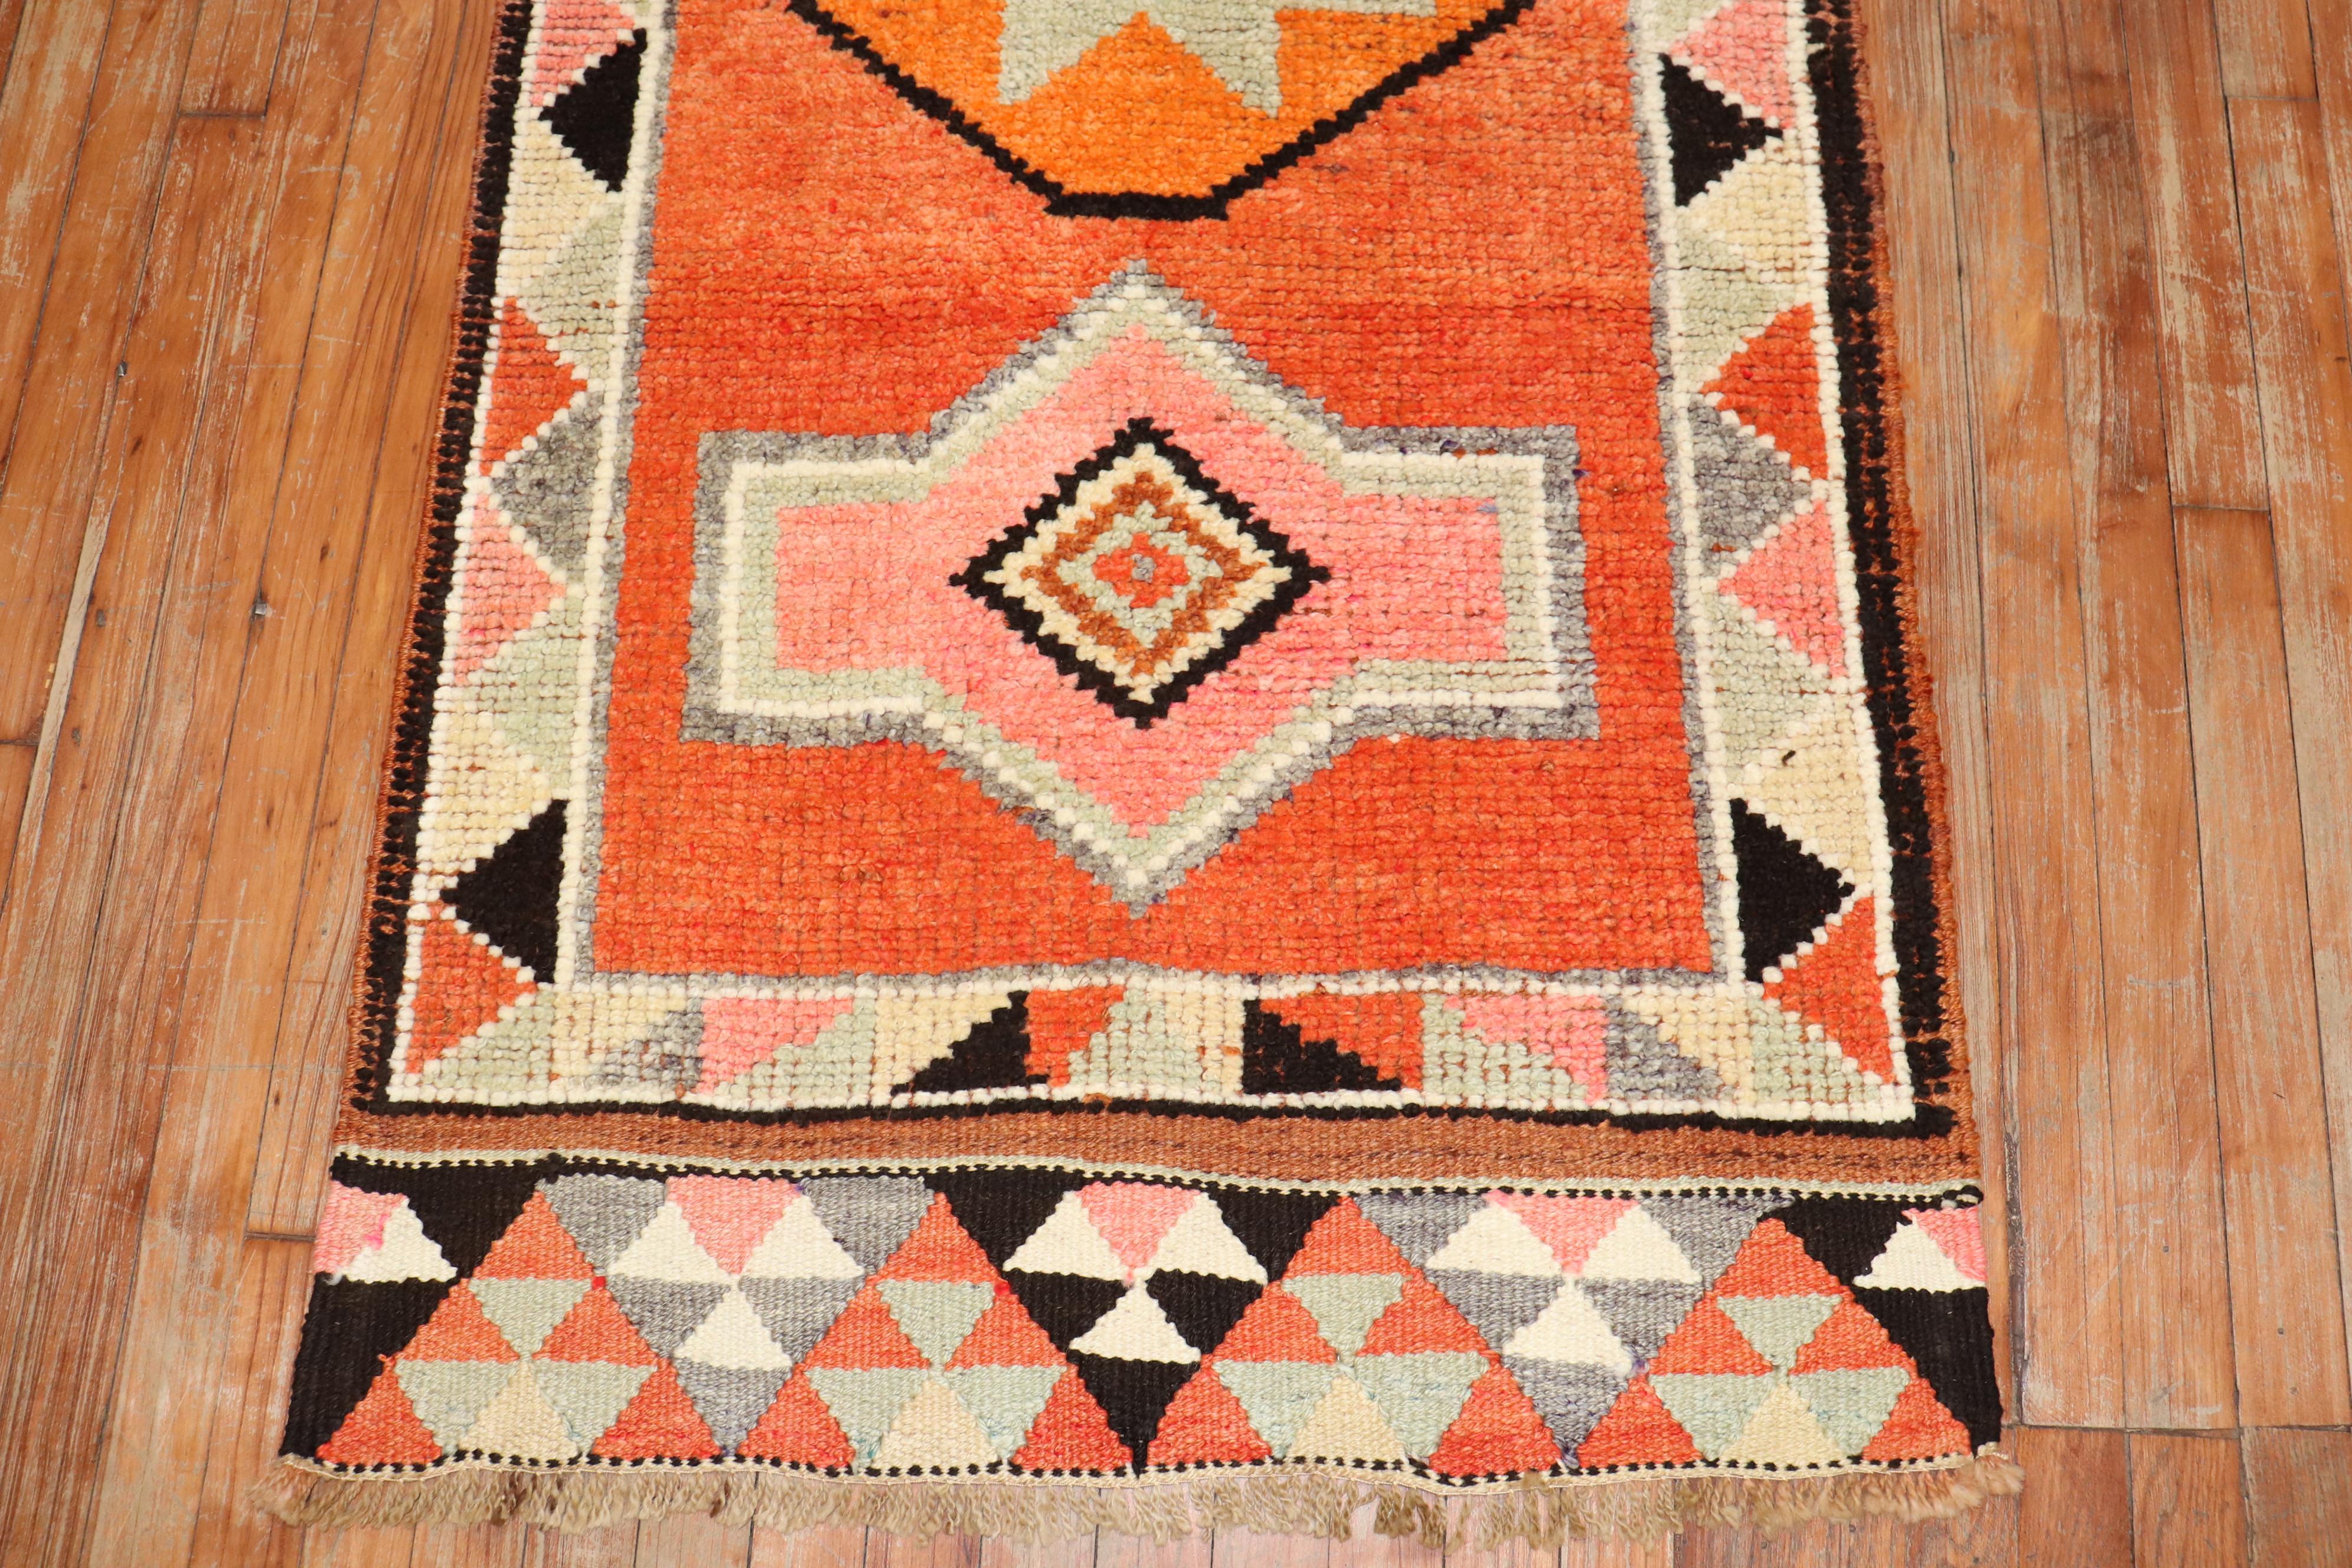 Mid 20th century tribal Turkish Anatolian runner with a tribal design in brown, orange, pink, and ivory dominant accents

Measures: 2'9